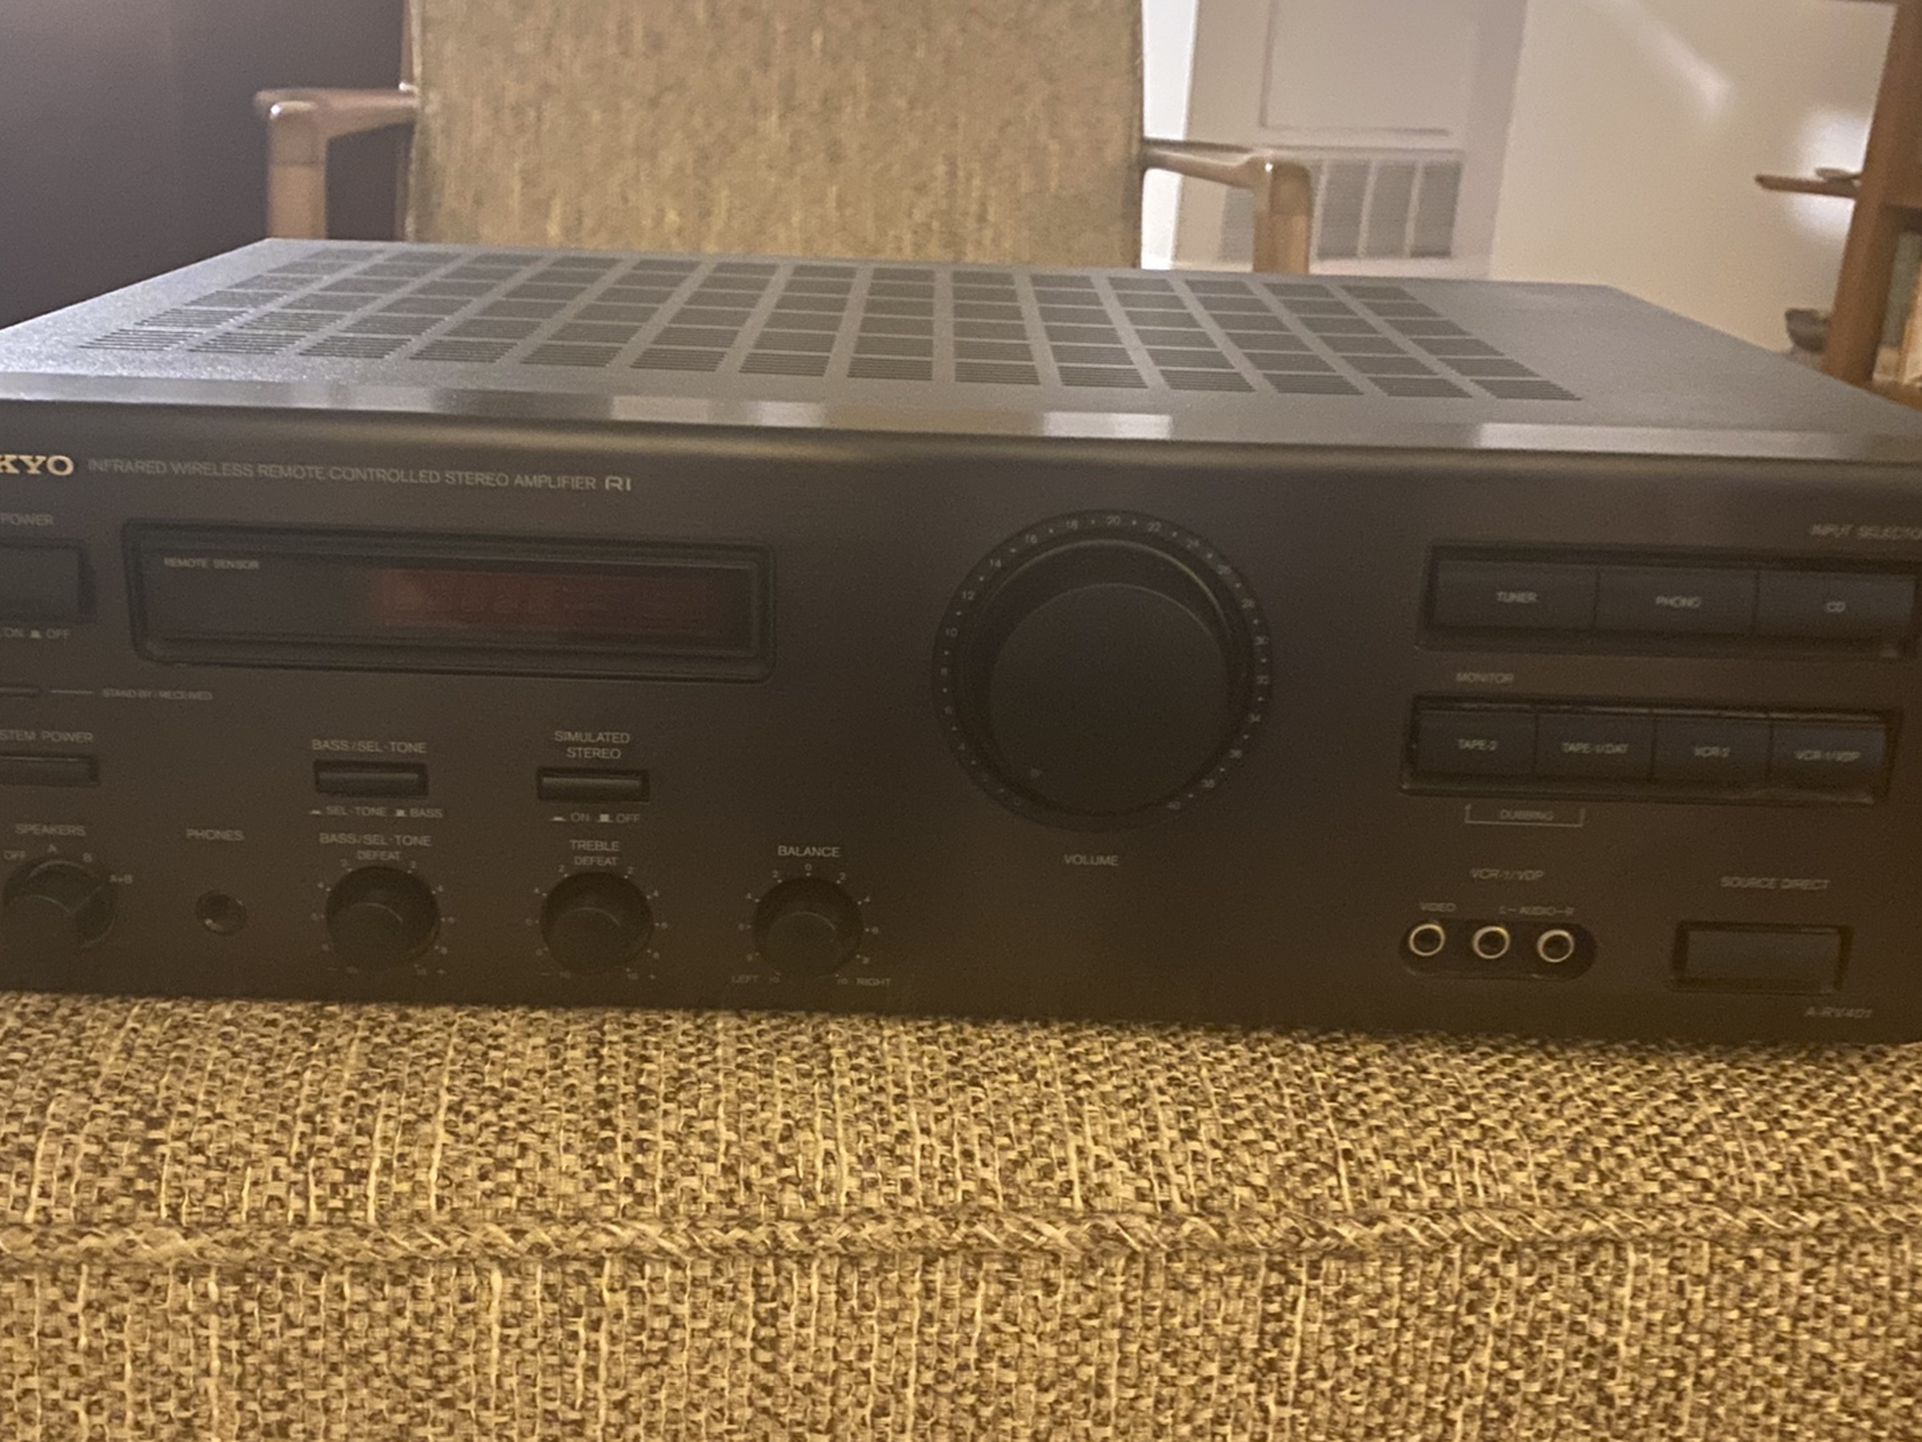 Only$10 Onkyo Receiver /amp... Basic Working Condition Priced To Sell!